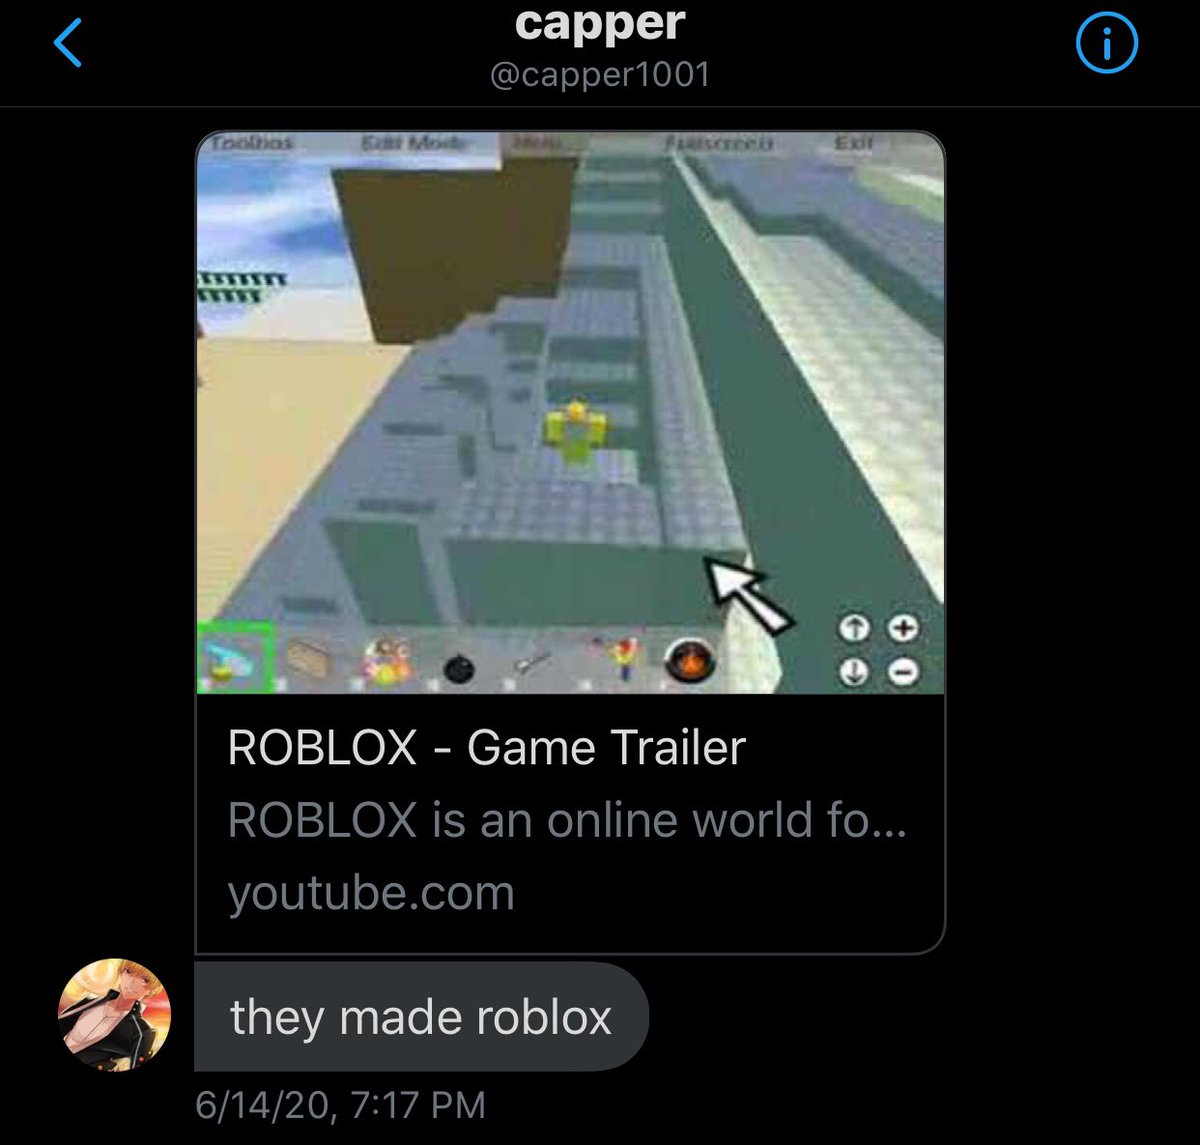 News Roblox On Twitter Roblox Has Been Made - news roblox at newsrobiox twitter